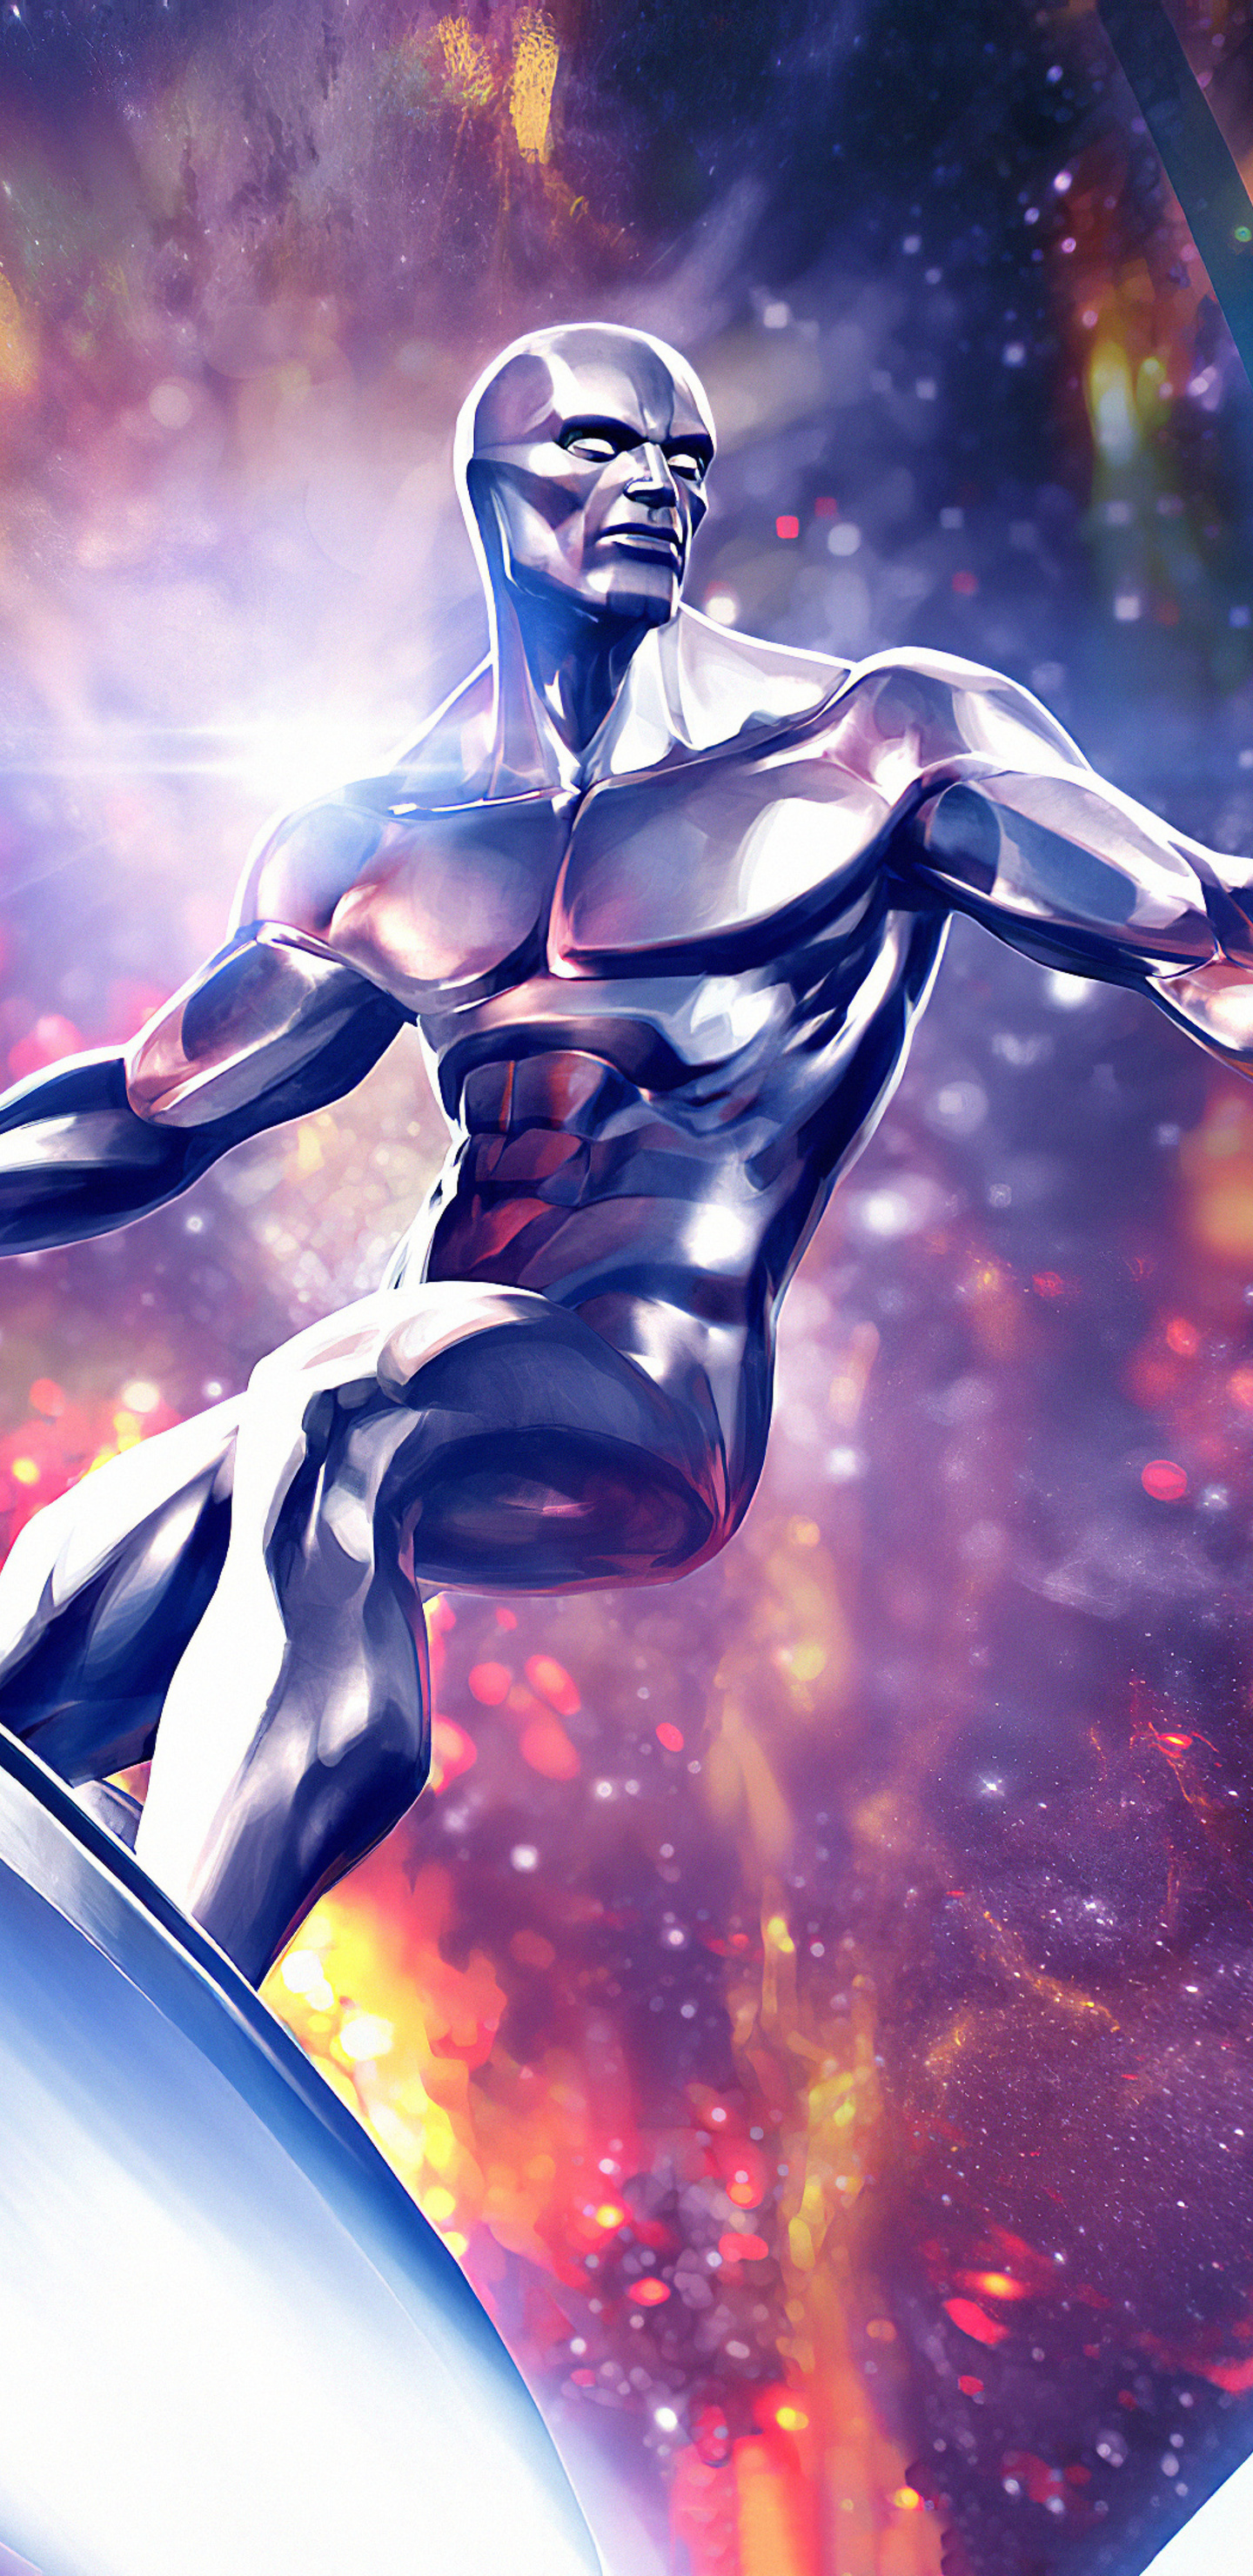 Silver Surfer Contest of Champions, Galaxy wallpapers, 1440x2960 HD Handy